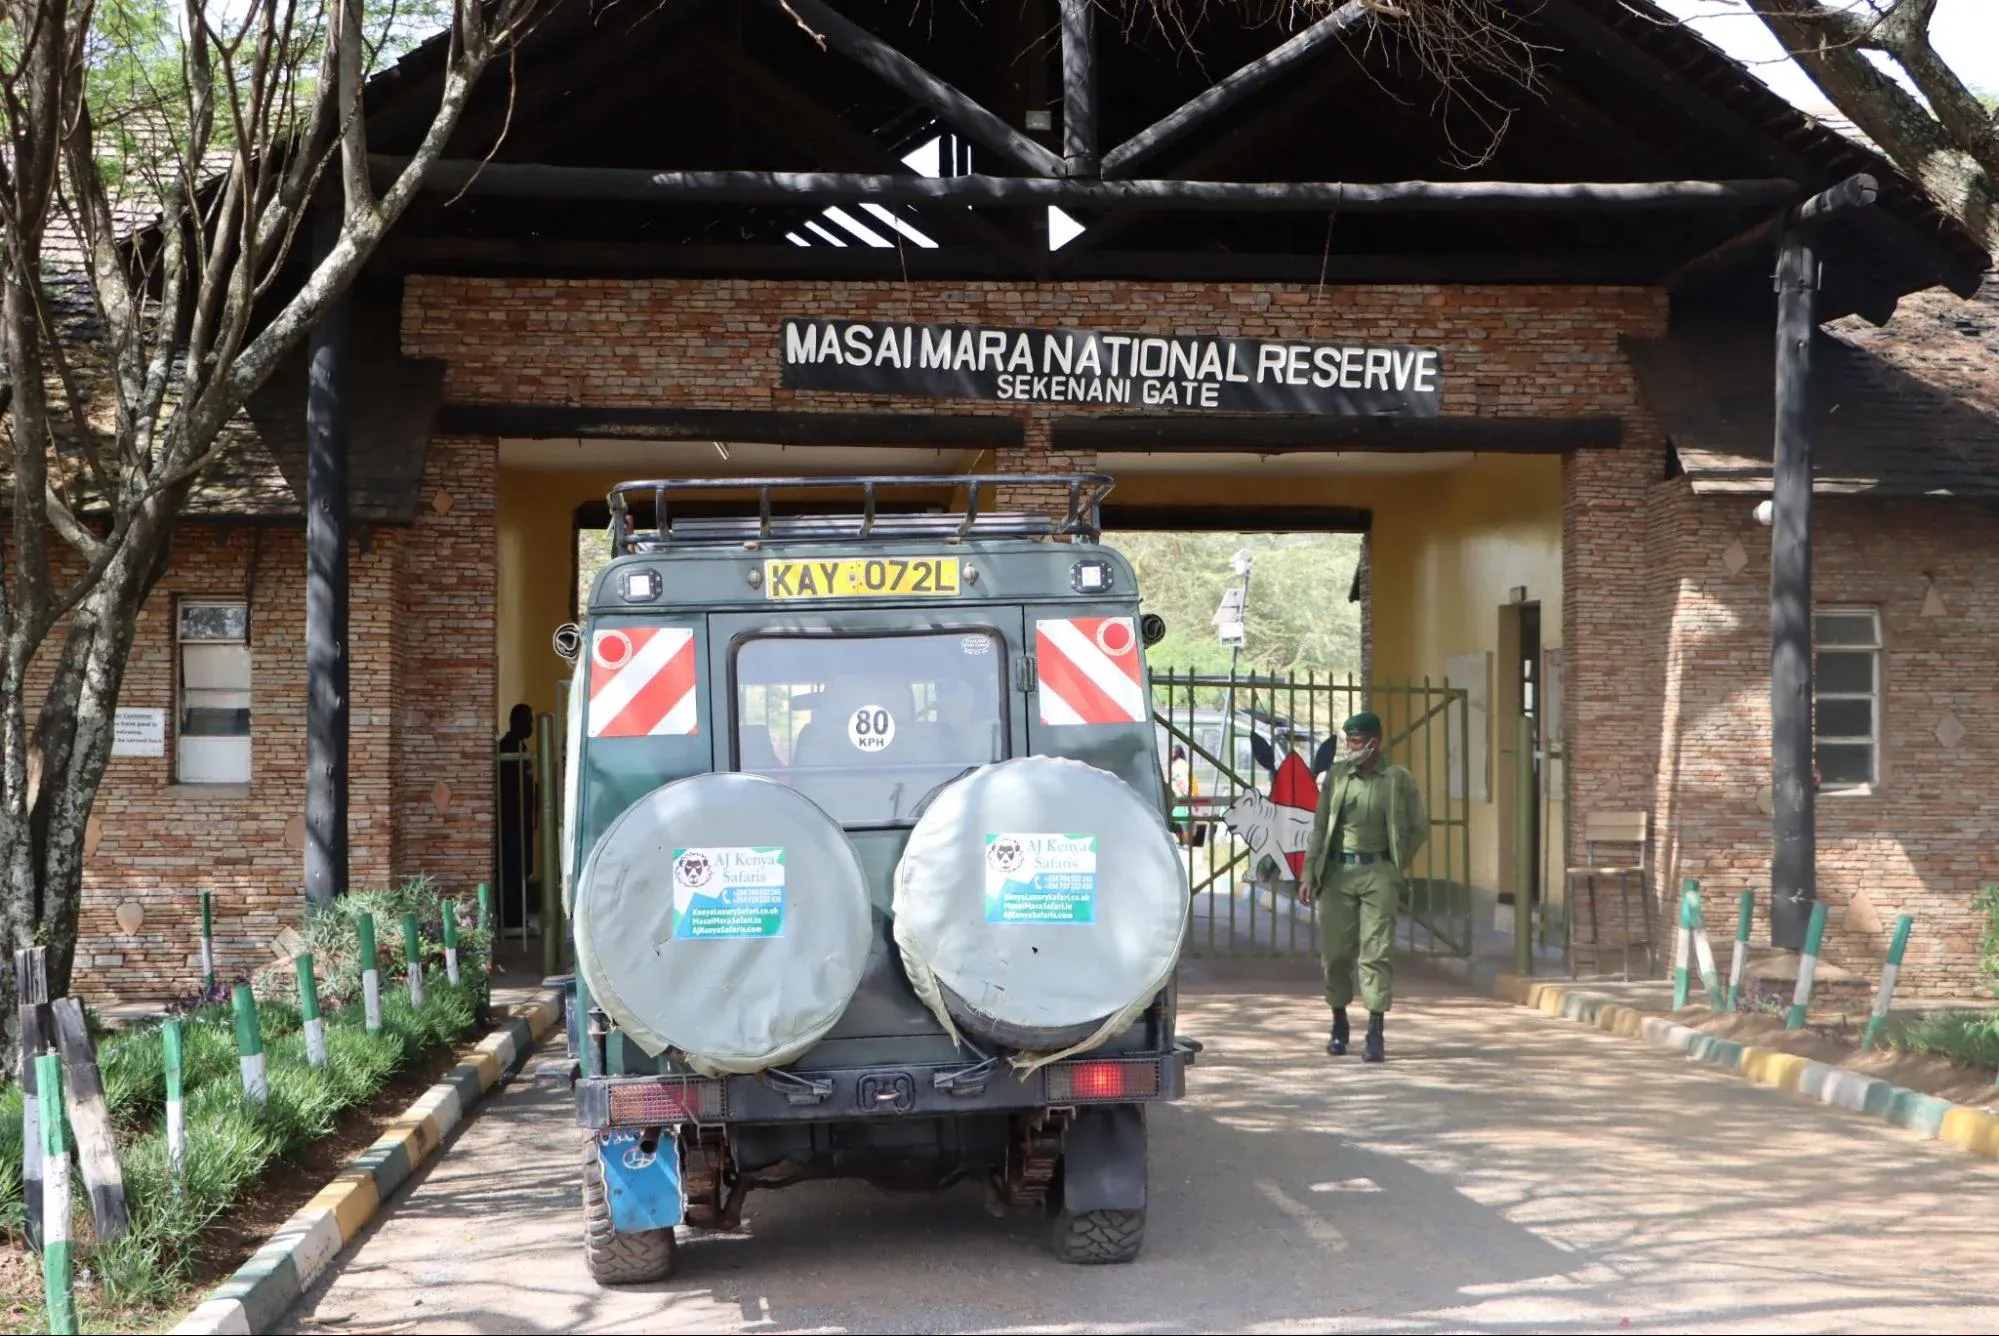 Does the cost of safari in Kenya include park entry fees - our luxury van at Masai Mara Sekenani Gate